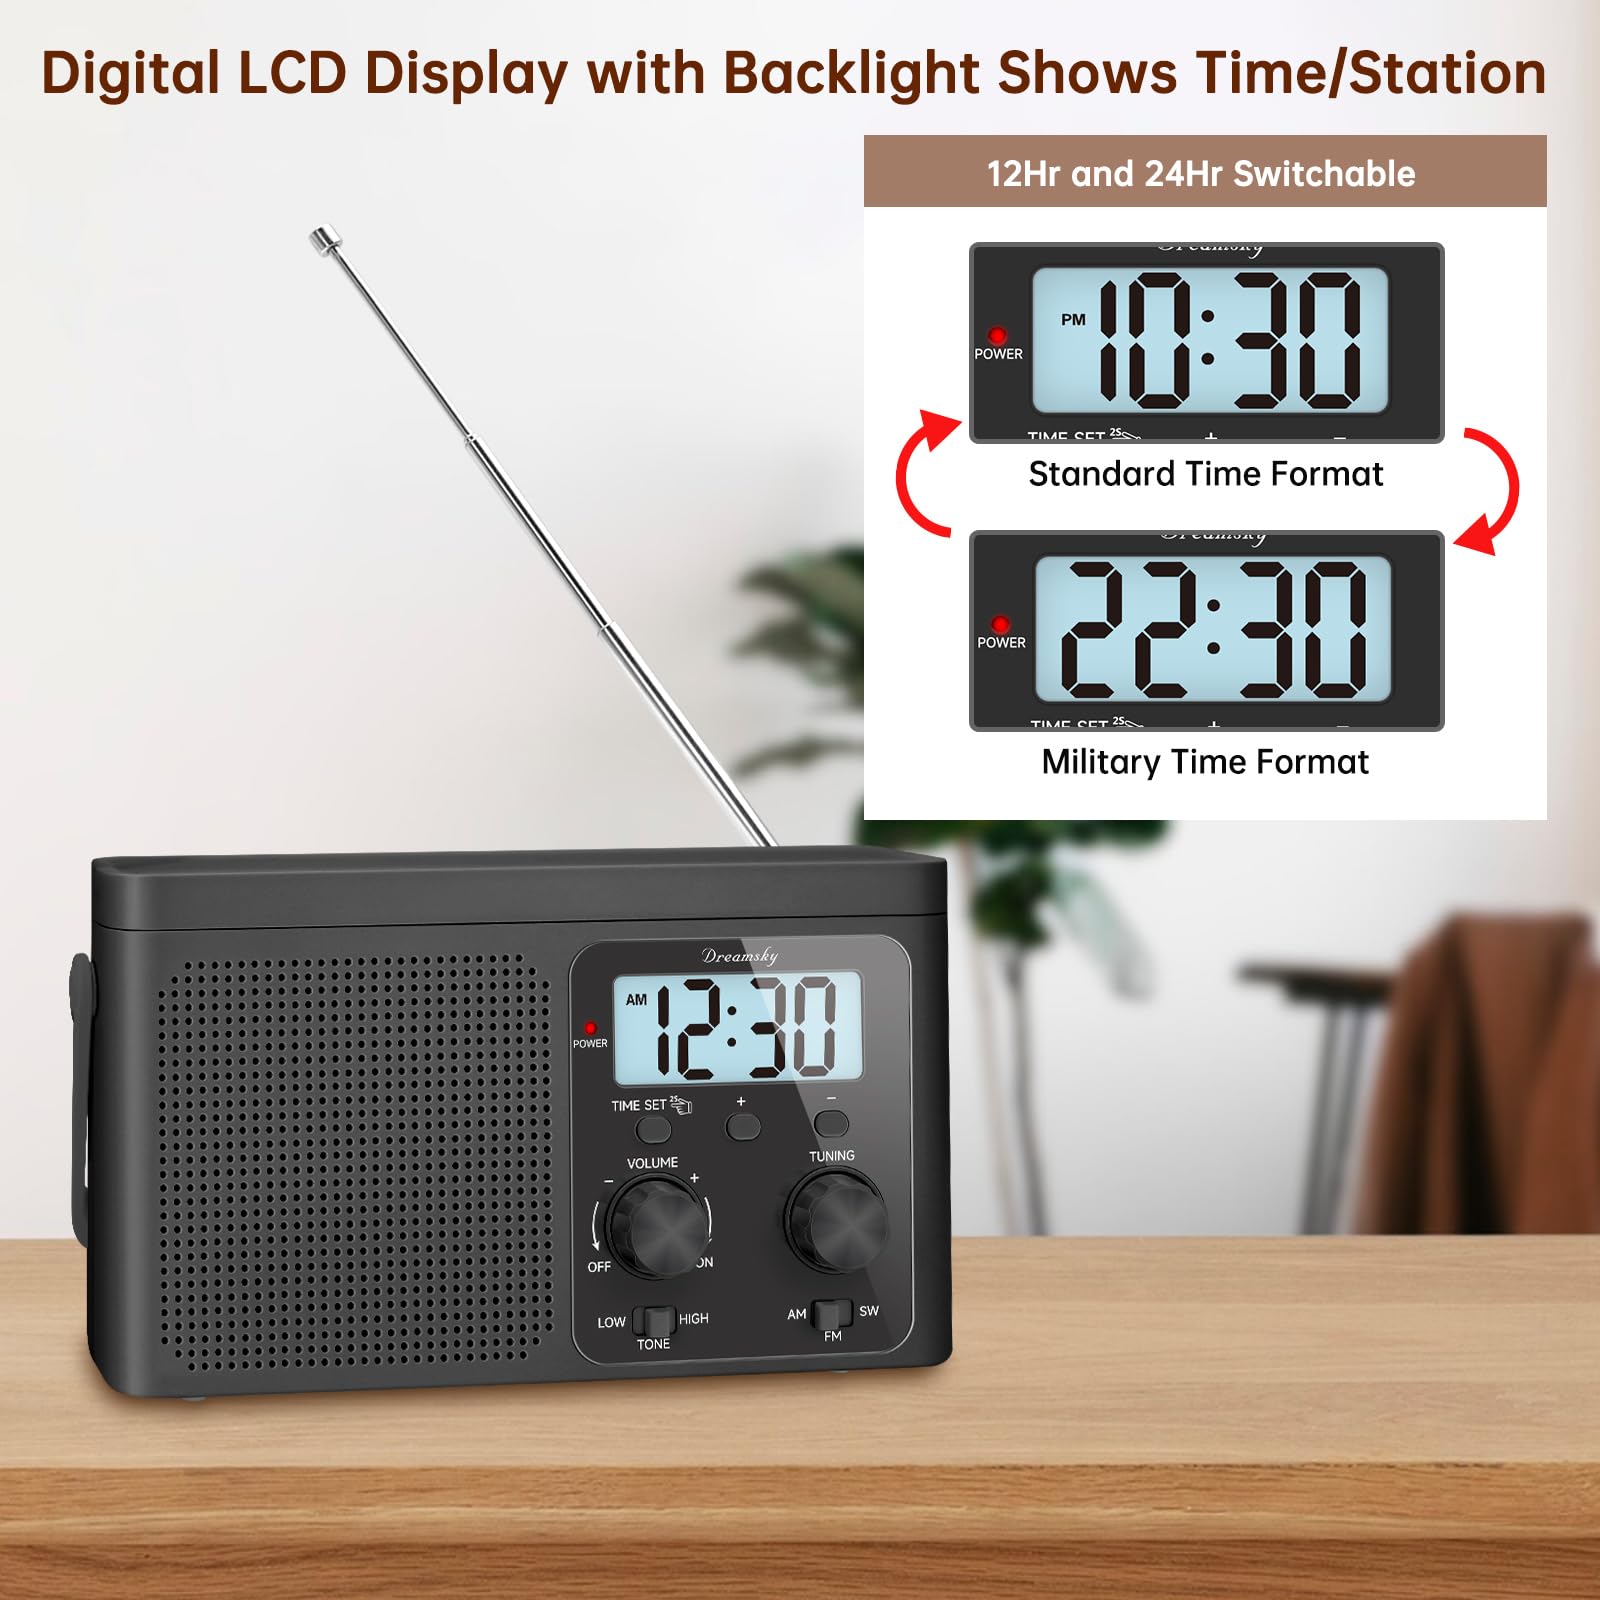 DreamSky Portable AM FM Shortwave Radio - Plug in Wall or Battery Powered, Transistor Antenna, Strong Reception, Large Analog Dial, Digital Display, 12/24Hr, Headphone Jack, Small Gfits for Seniors